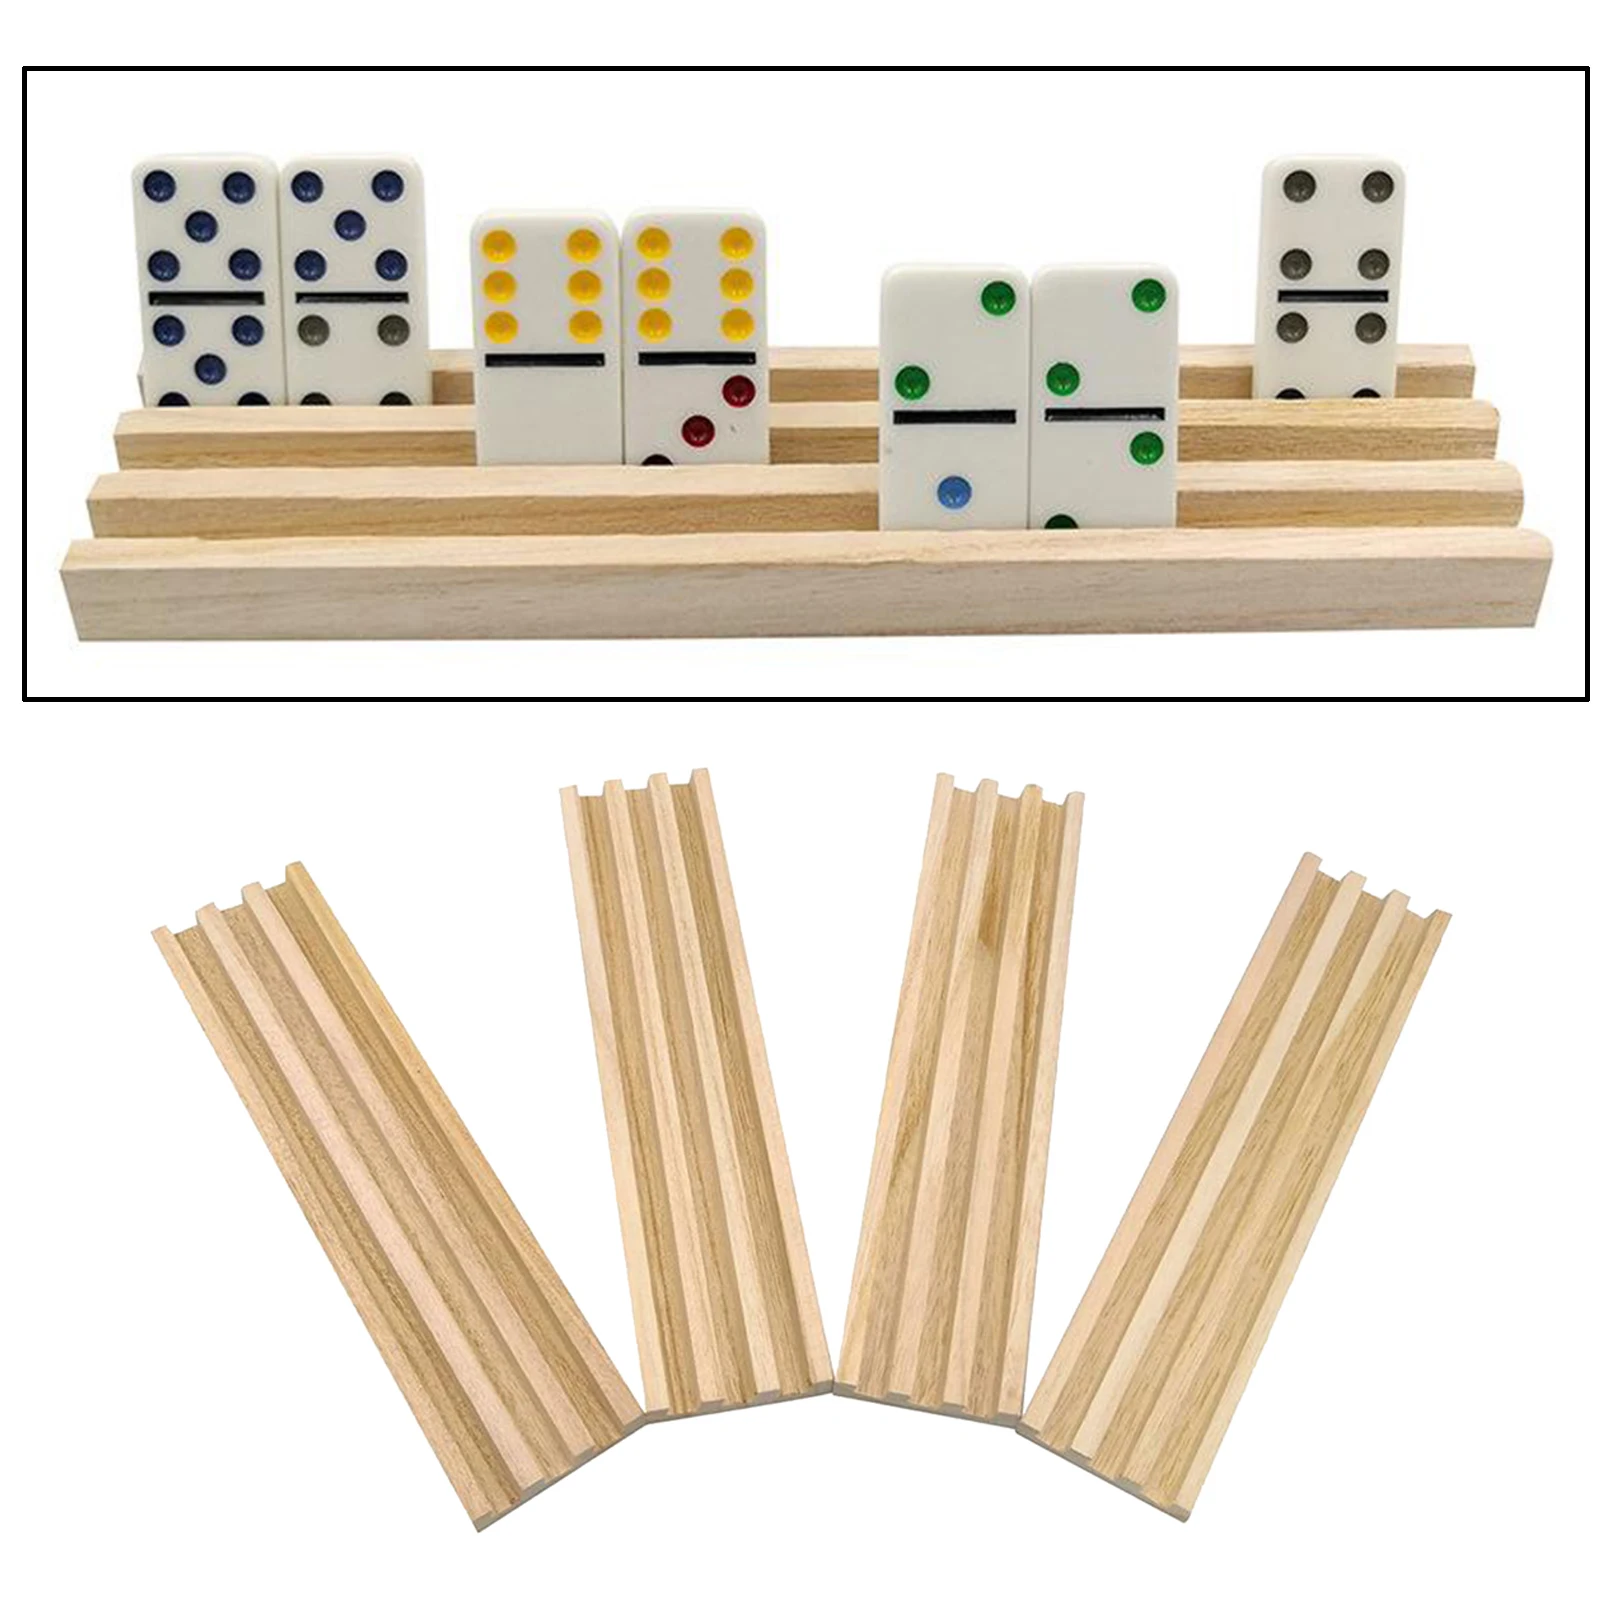 4pcs/set Unpainted Wood Domino Trays Racks Stand for Mahjong Chicken Foot